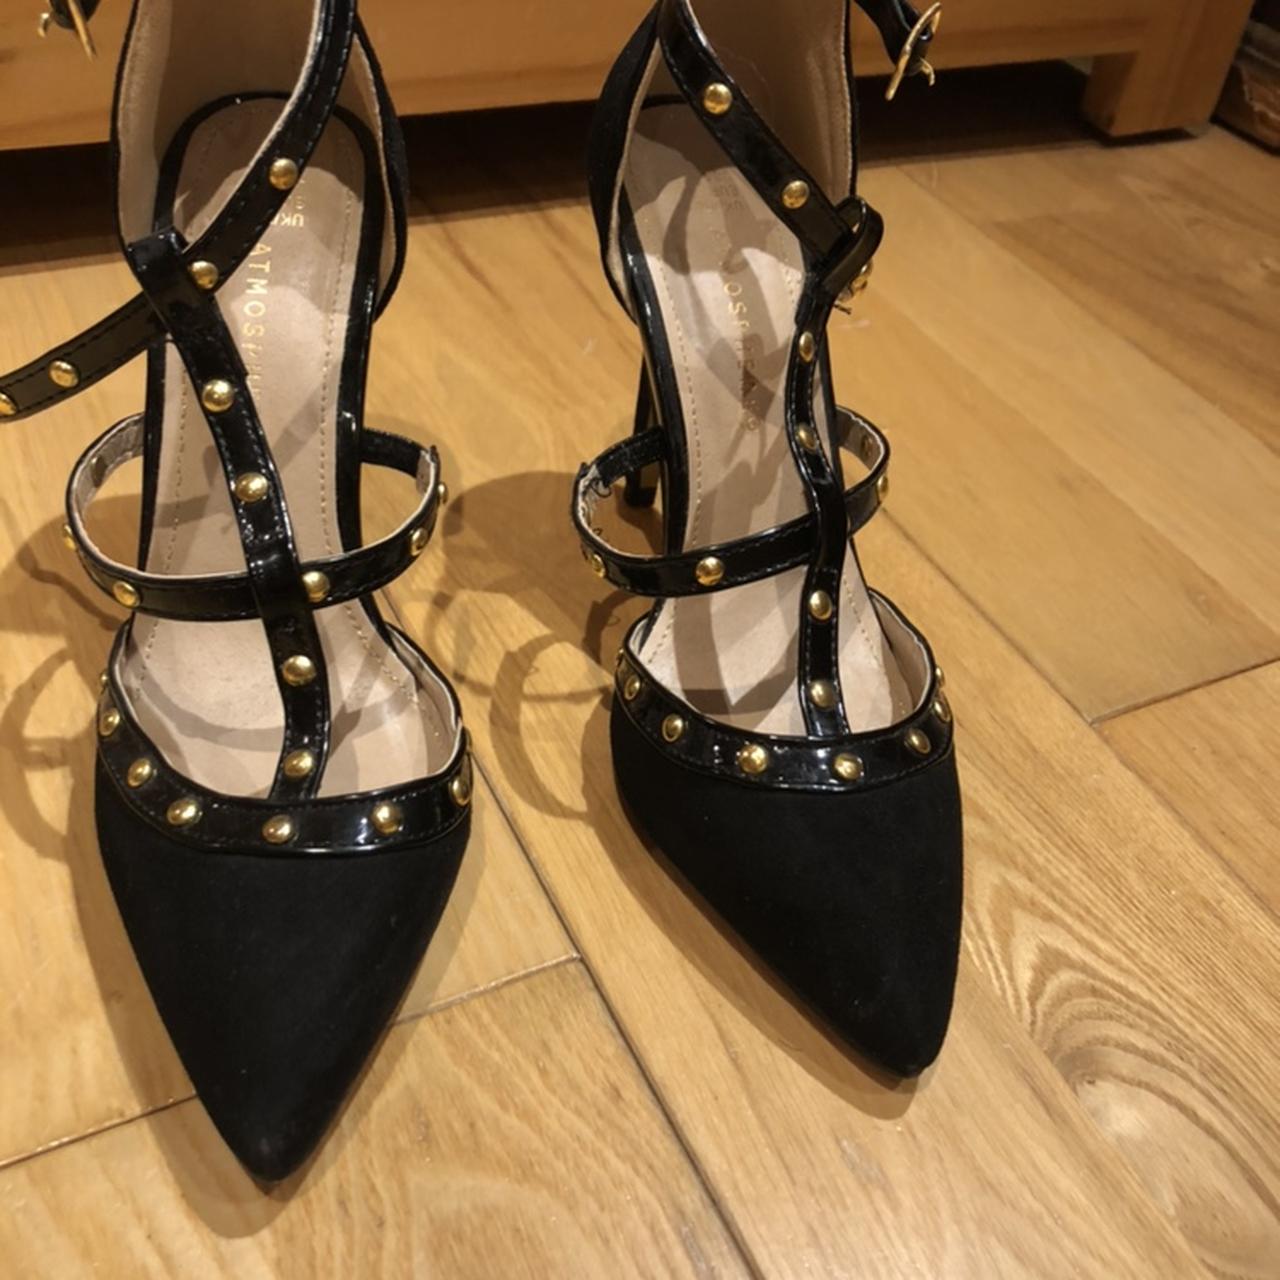 Black Louis Bouton style pointed shoes from primark